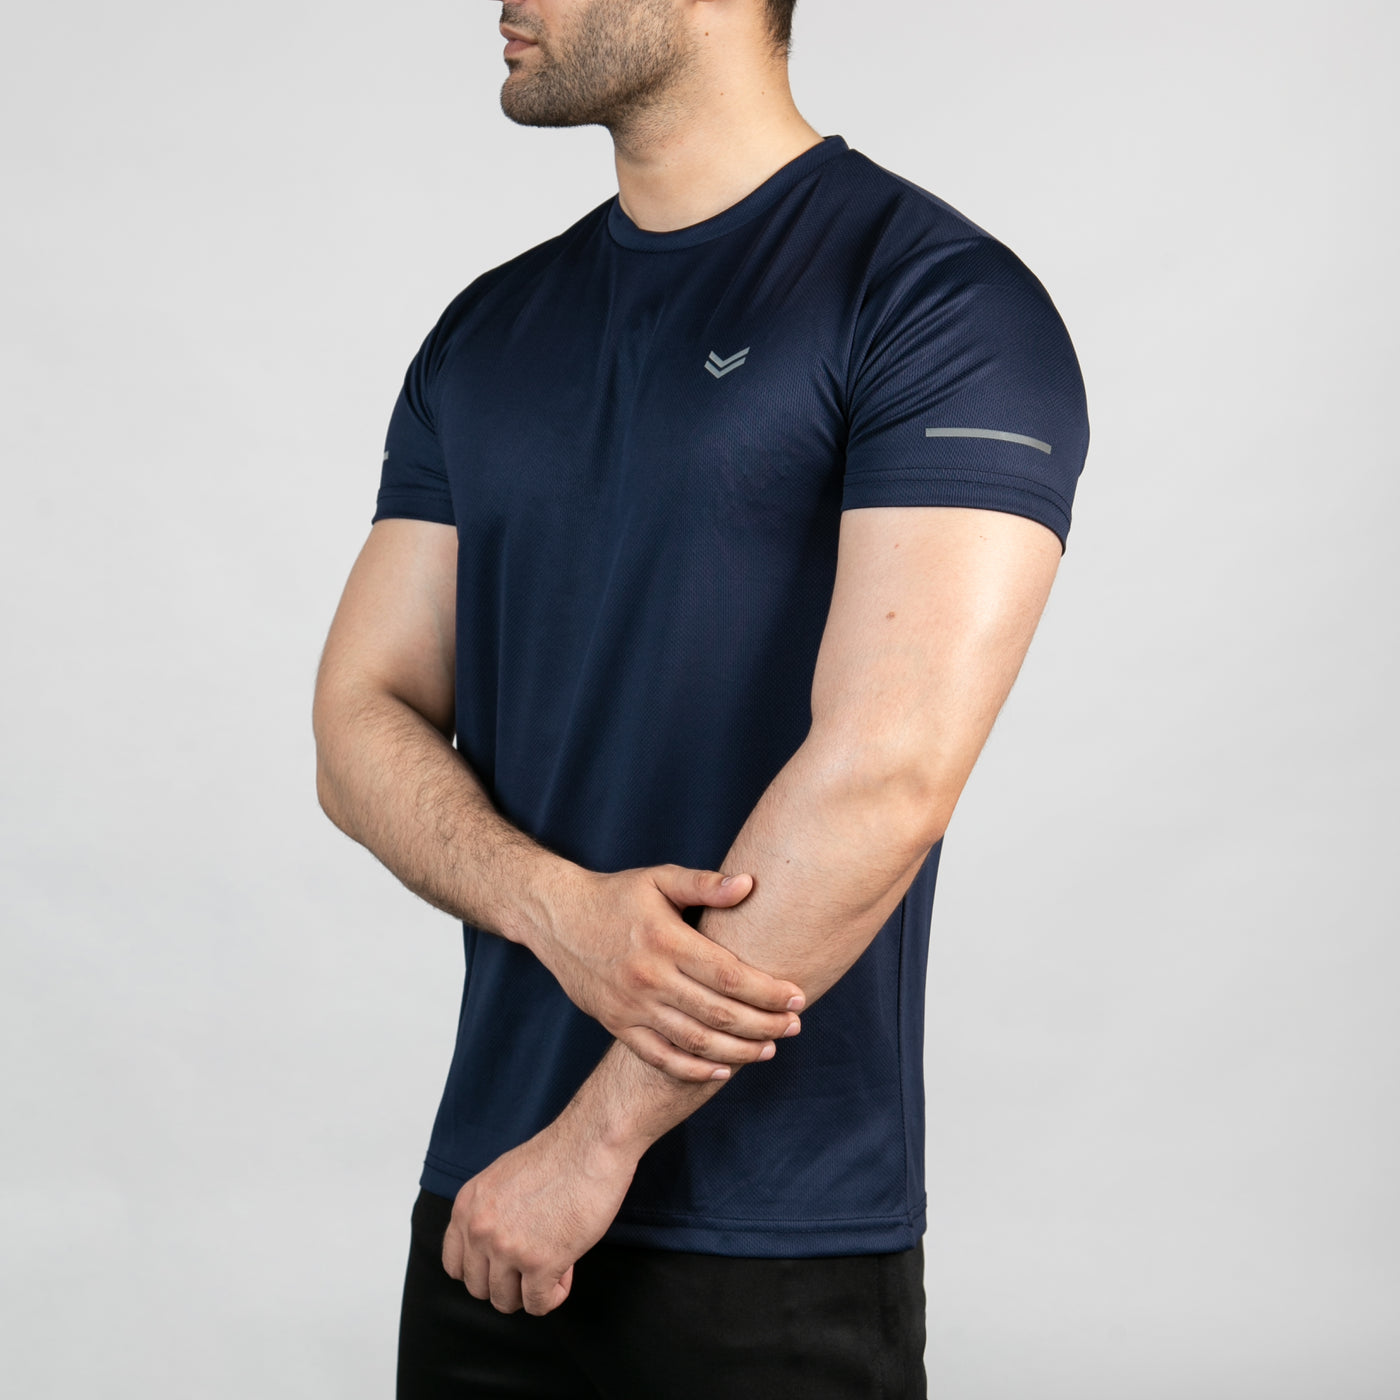 Navy Mesh Quick Dry T-Shirt With Reflective Detailing